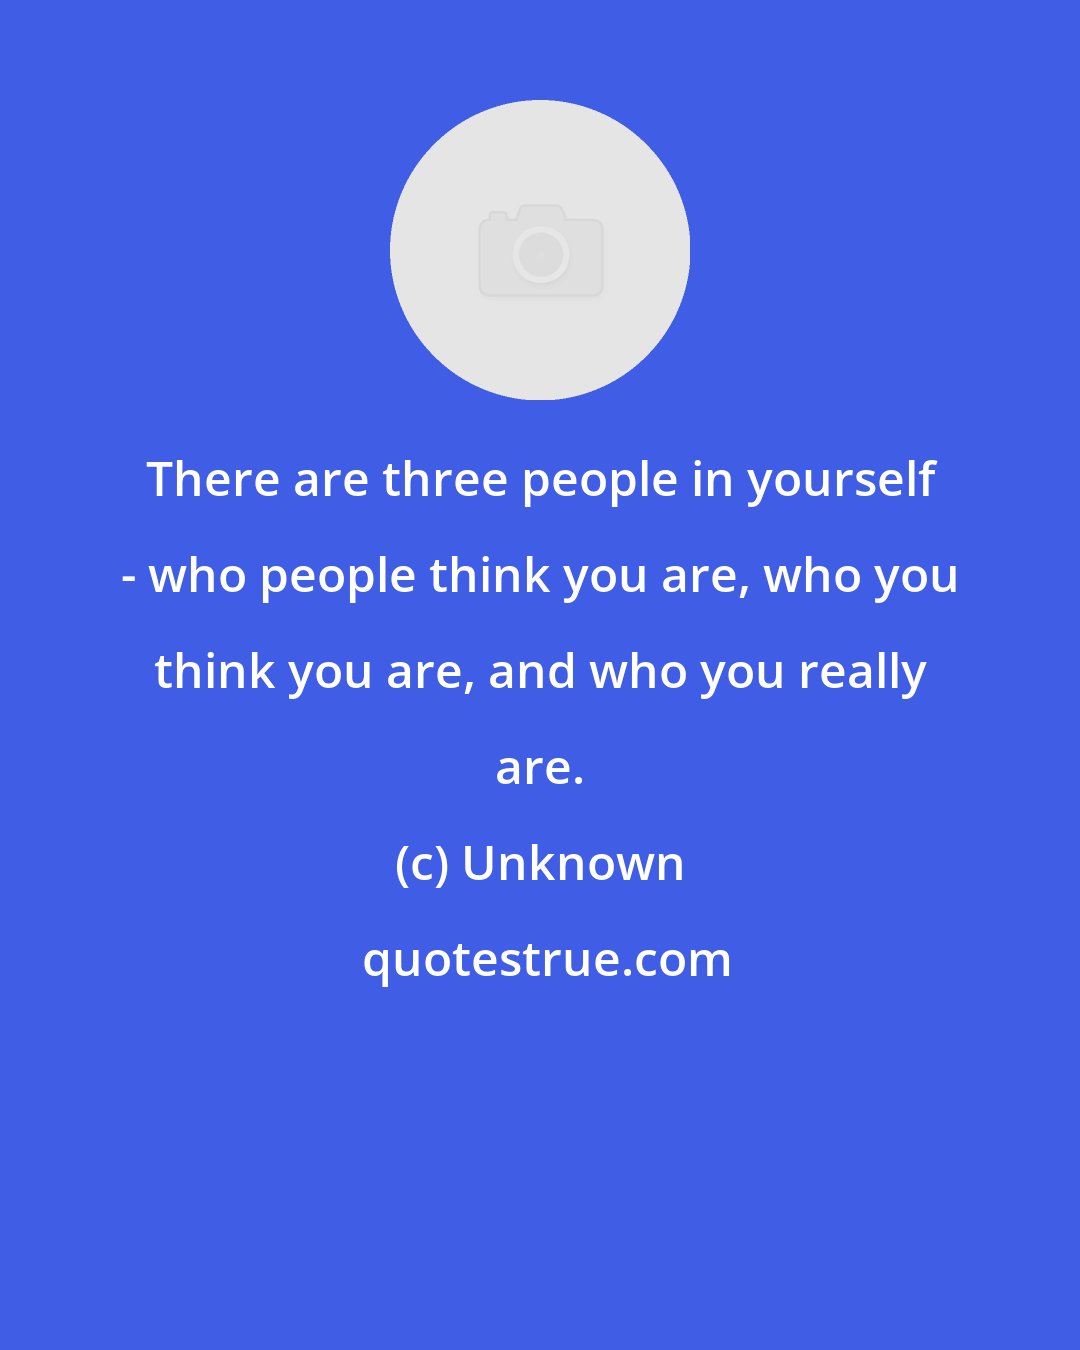 Unknown: There are three people in yourself - who people think you are, who you think you are, and who you really are.